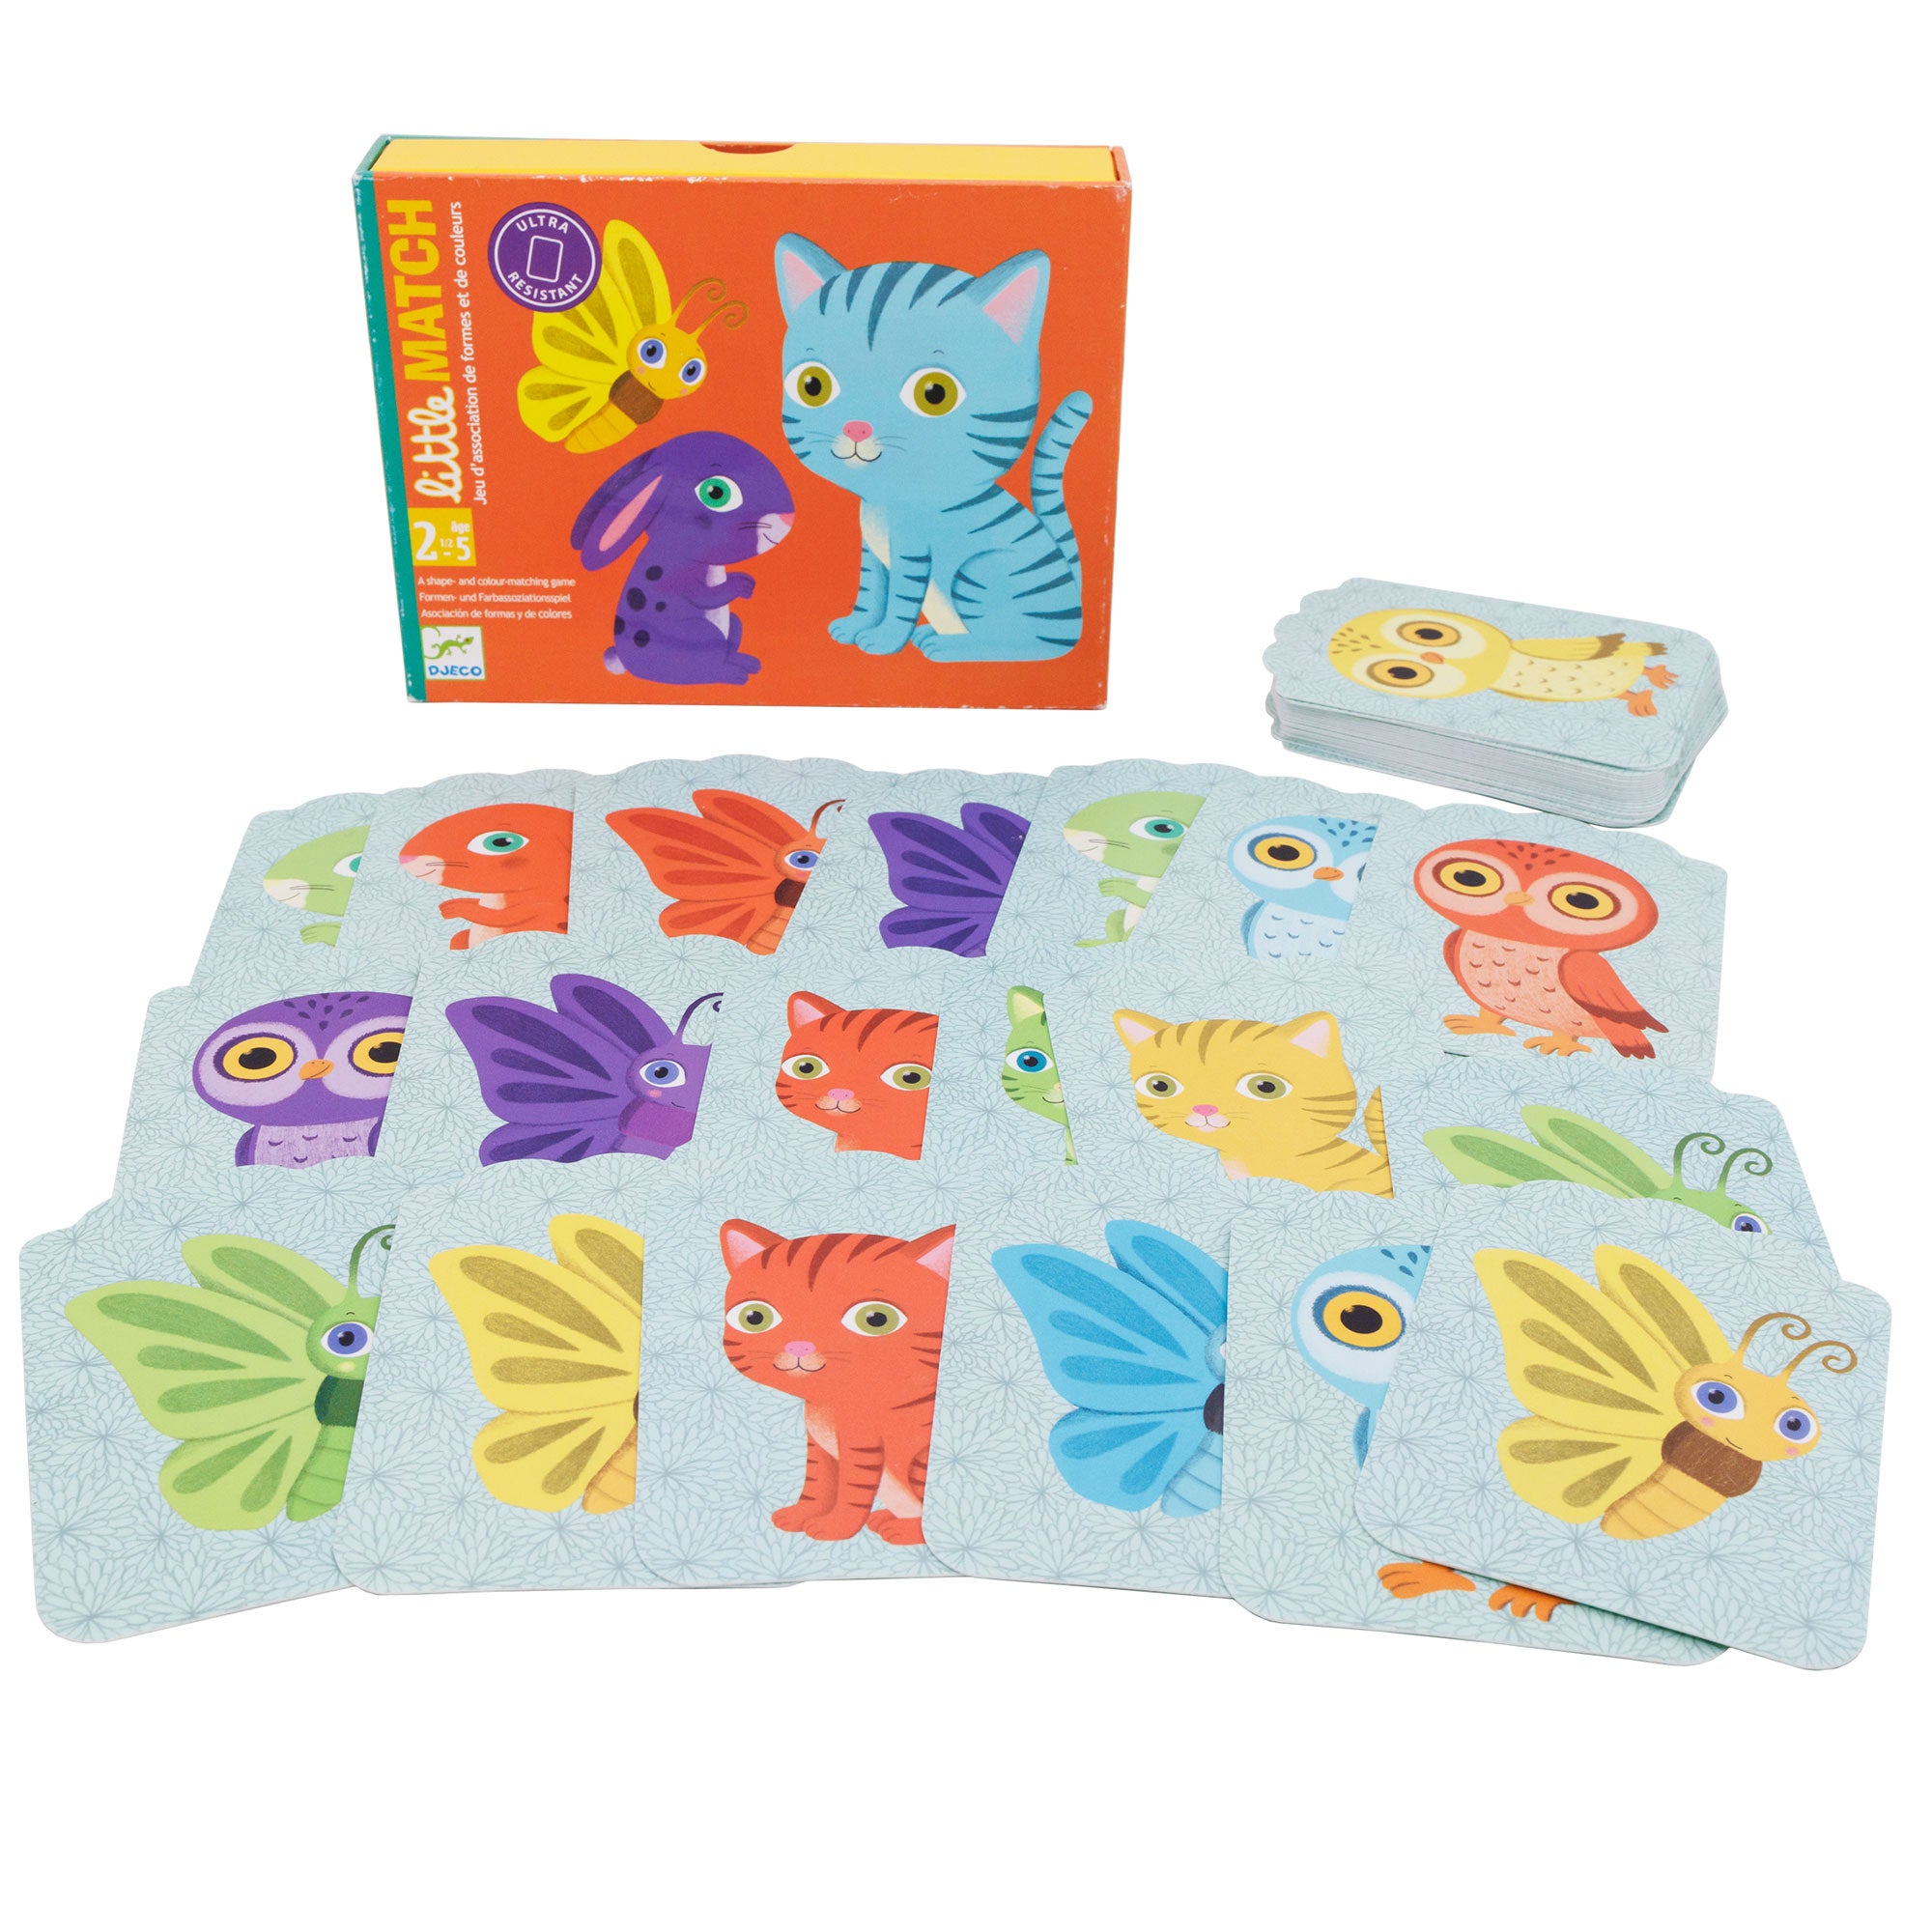 Djeco Little Match Imitation Toddler Card Game